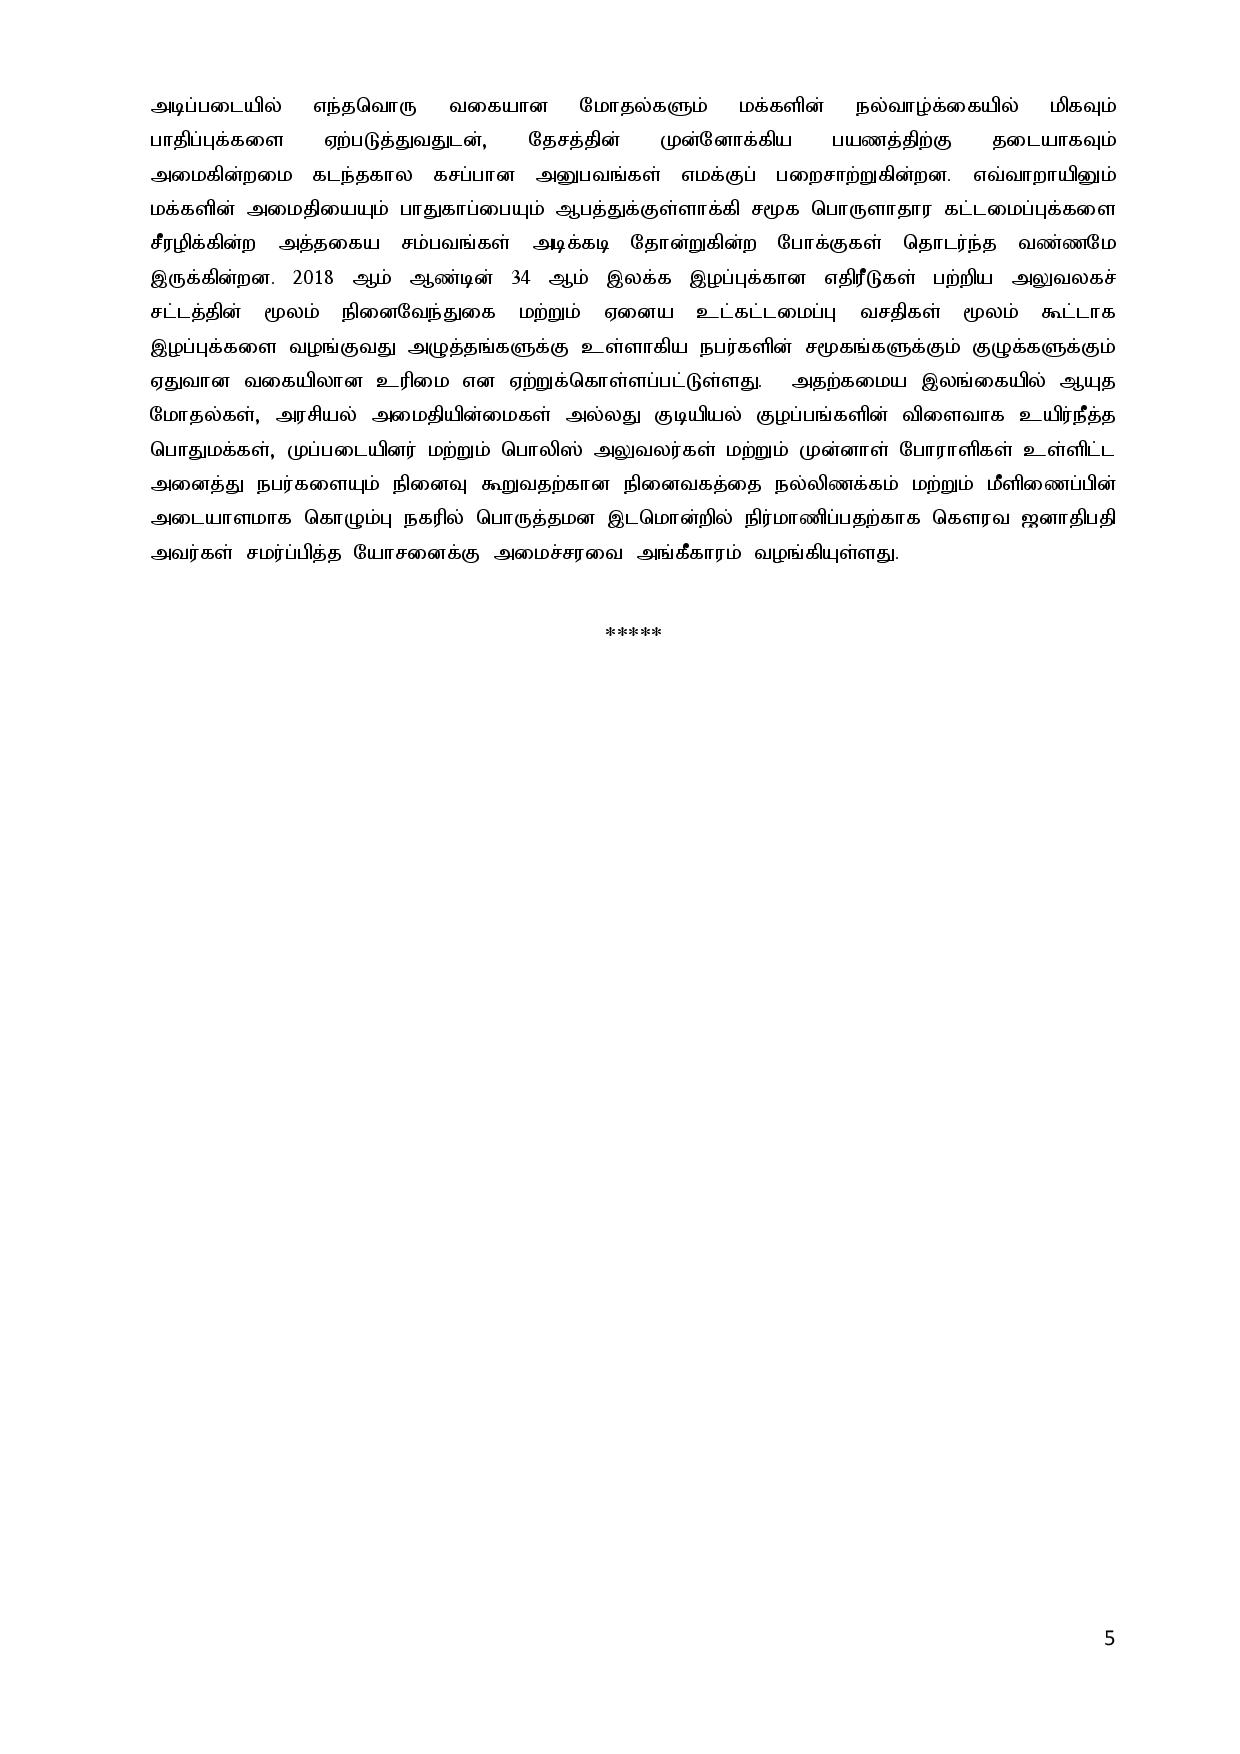 Cabinet Decisions on 22.05.2023 Tamil 1 page 005